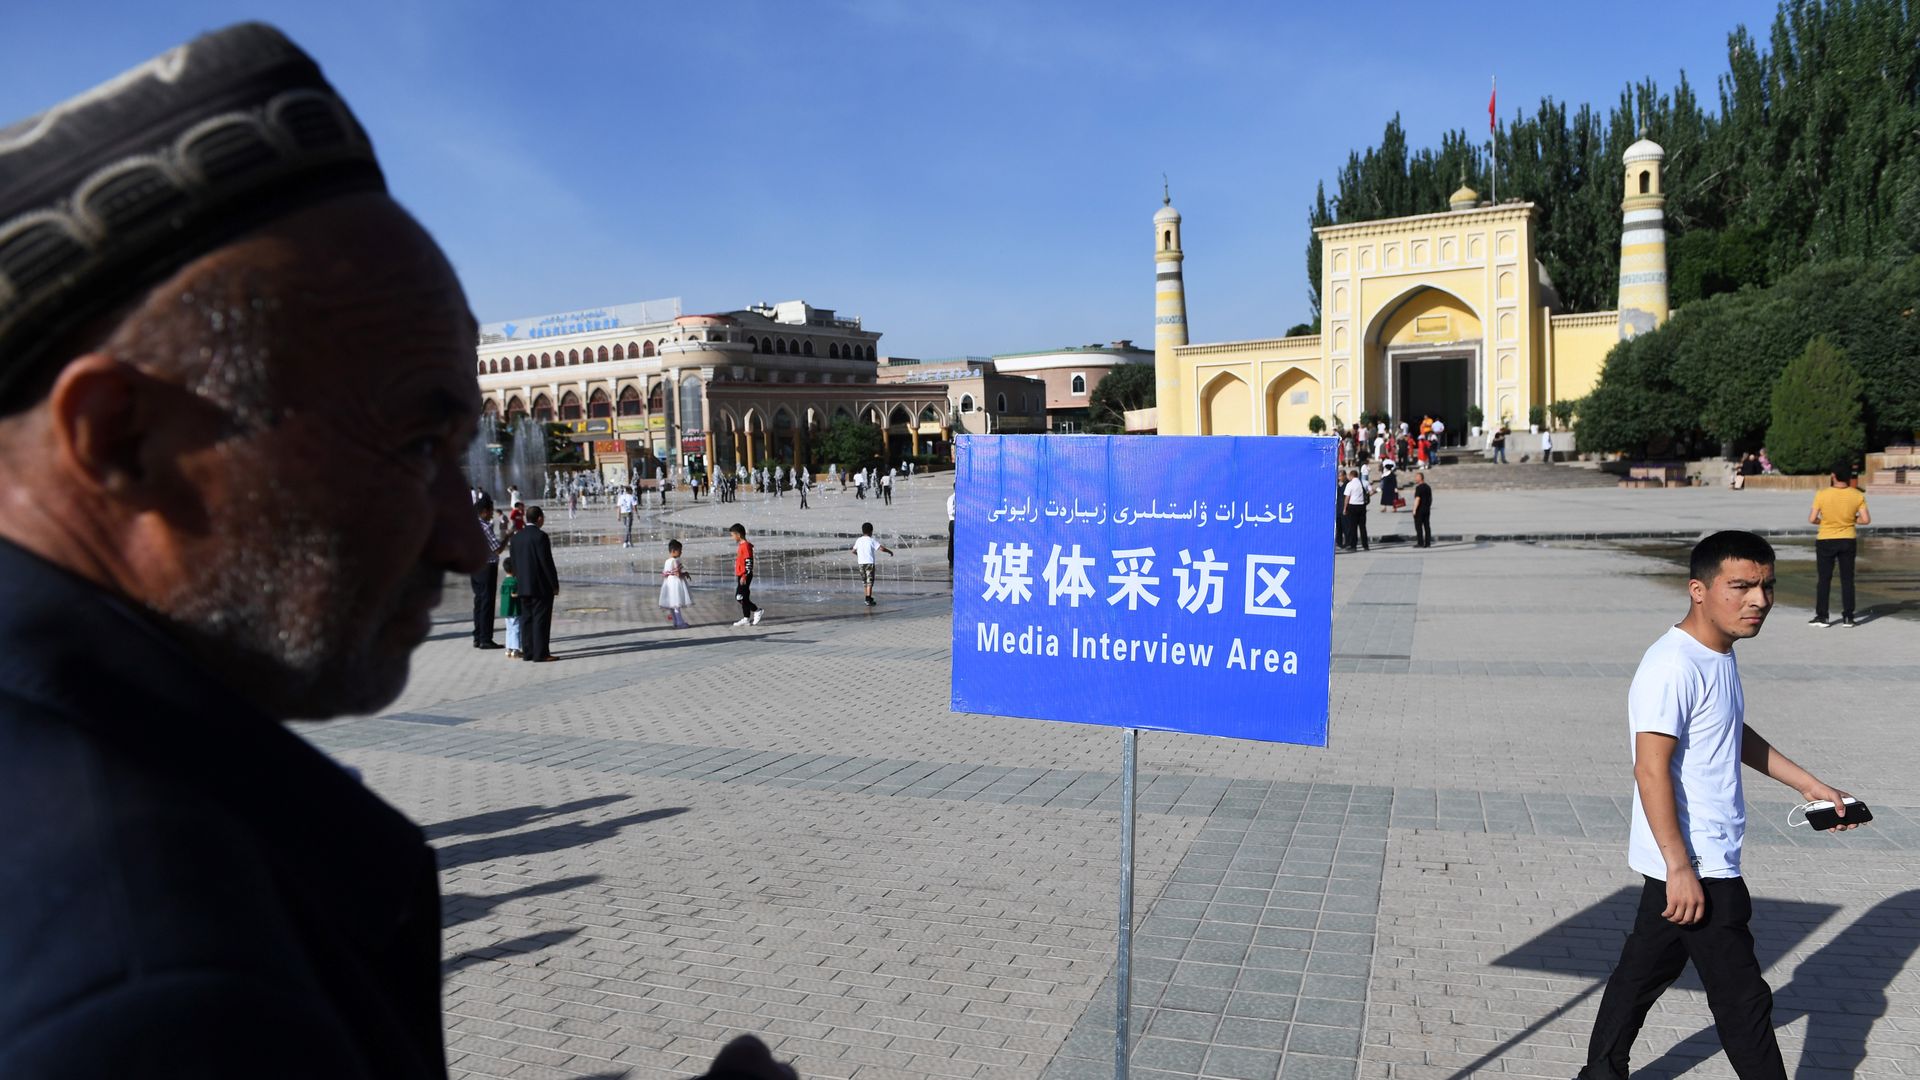 A Muslim man is near a designated media interview space in the Xinjiang region of China.